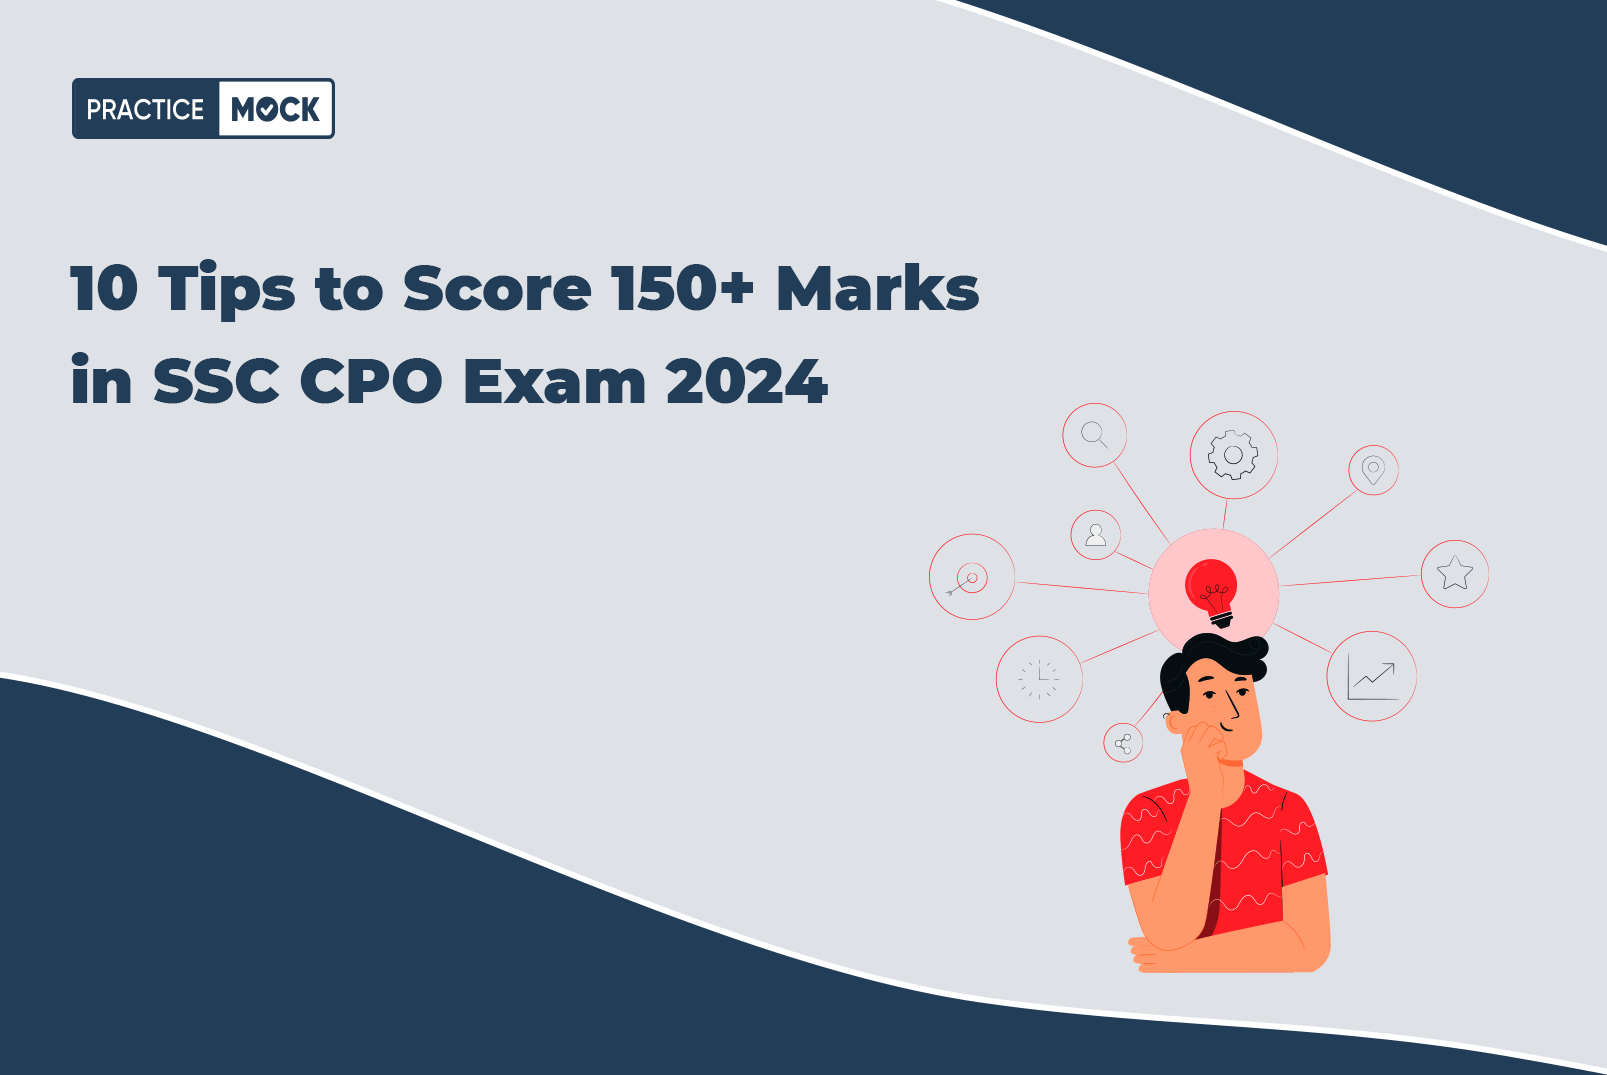 10 Tips to Score 150+ Marks in SSC CPO Exam 2024